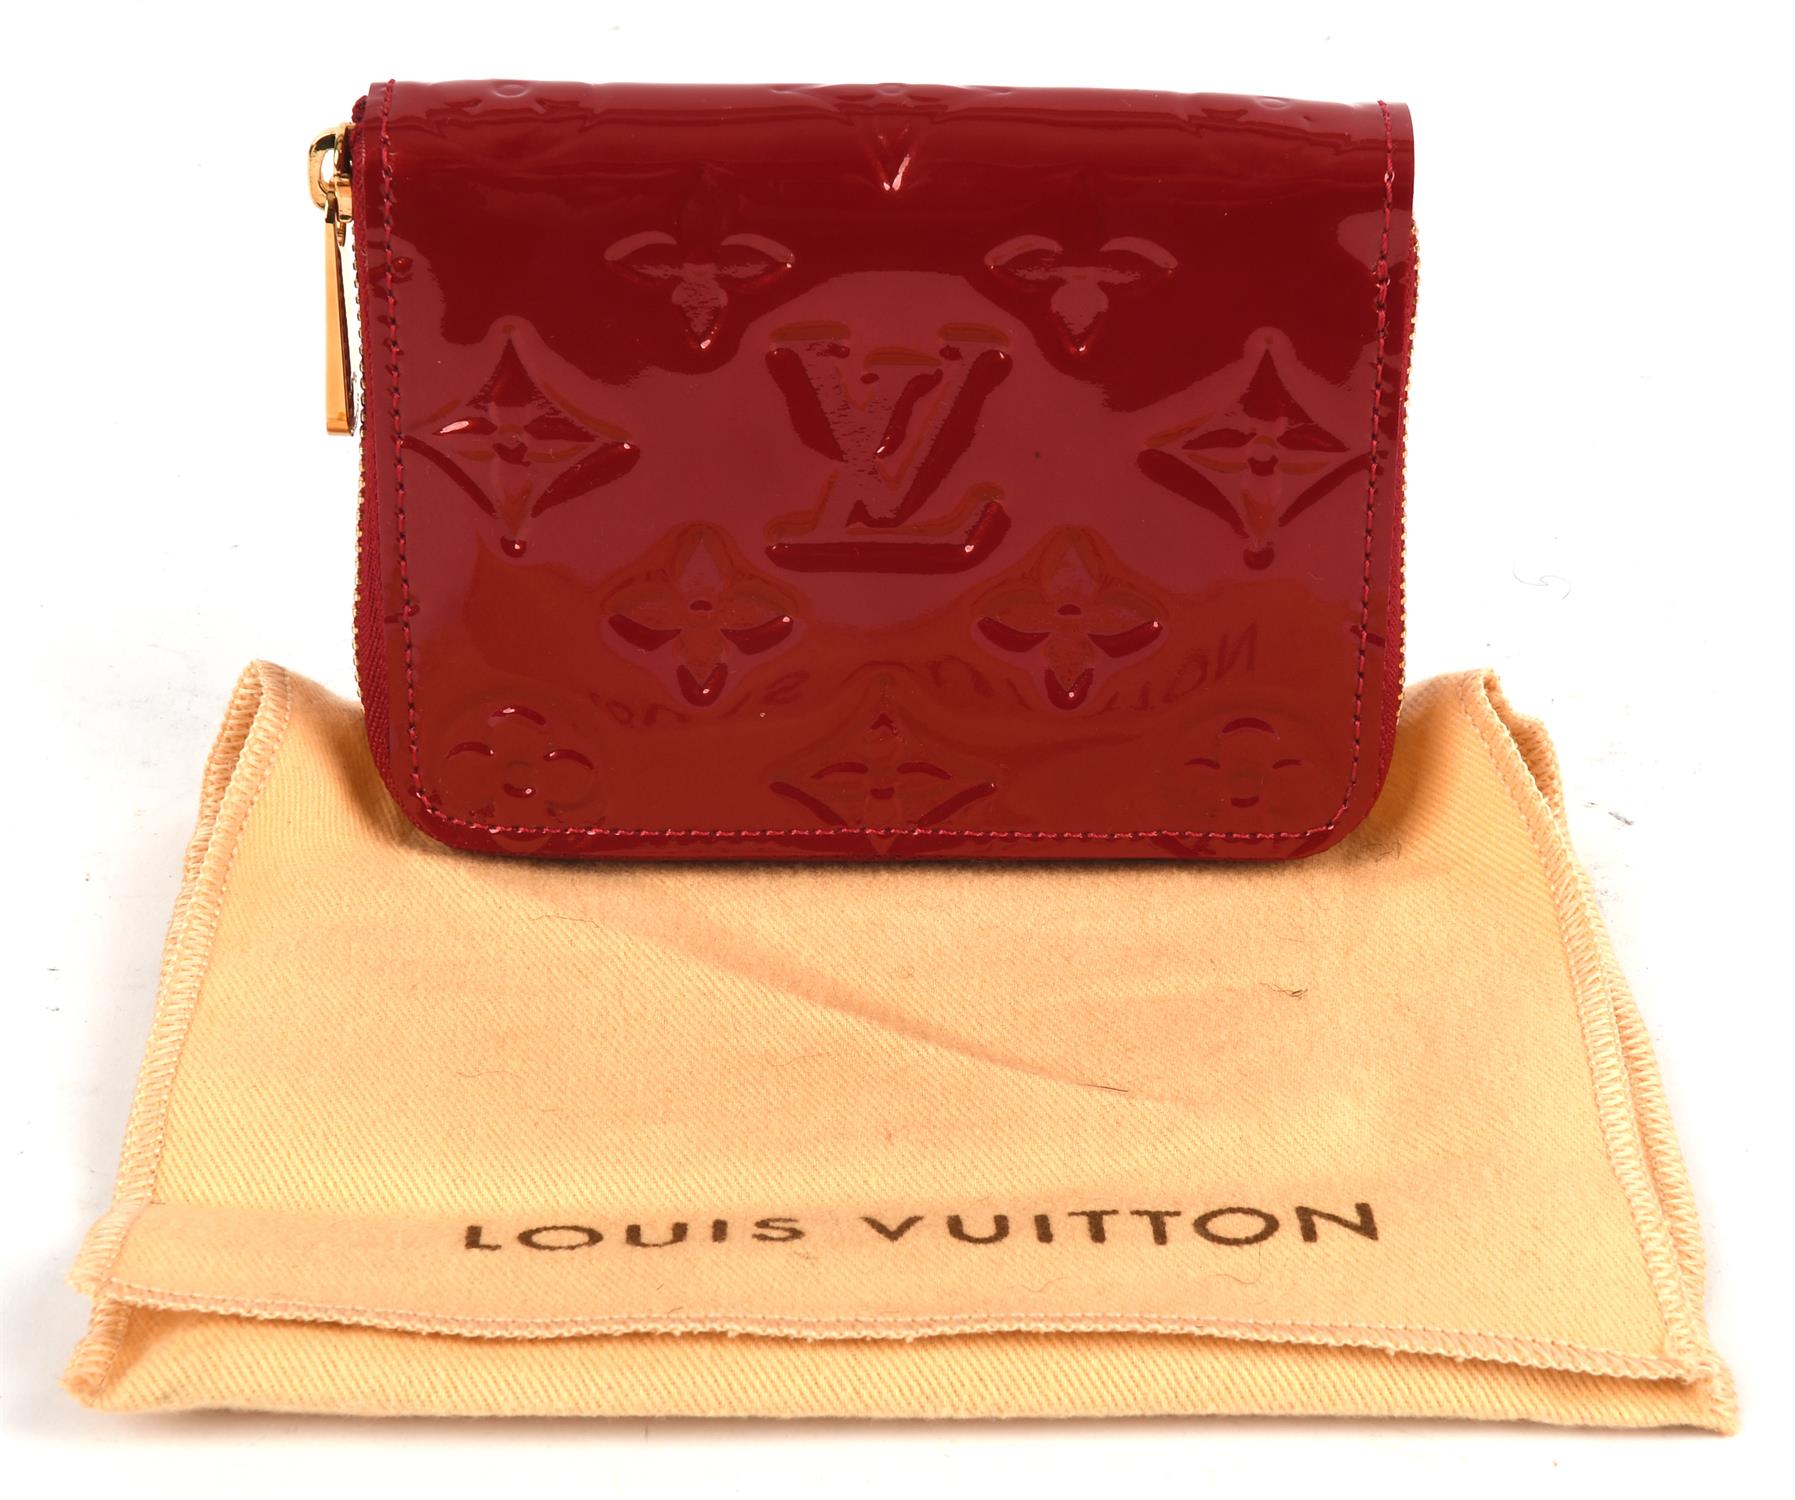 LOUIS VUITTON lipstick red Vernis varnished leather zipped purse in dust cover